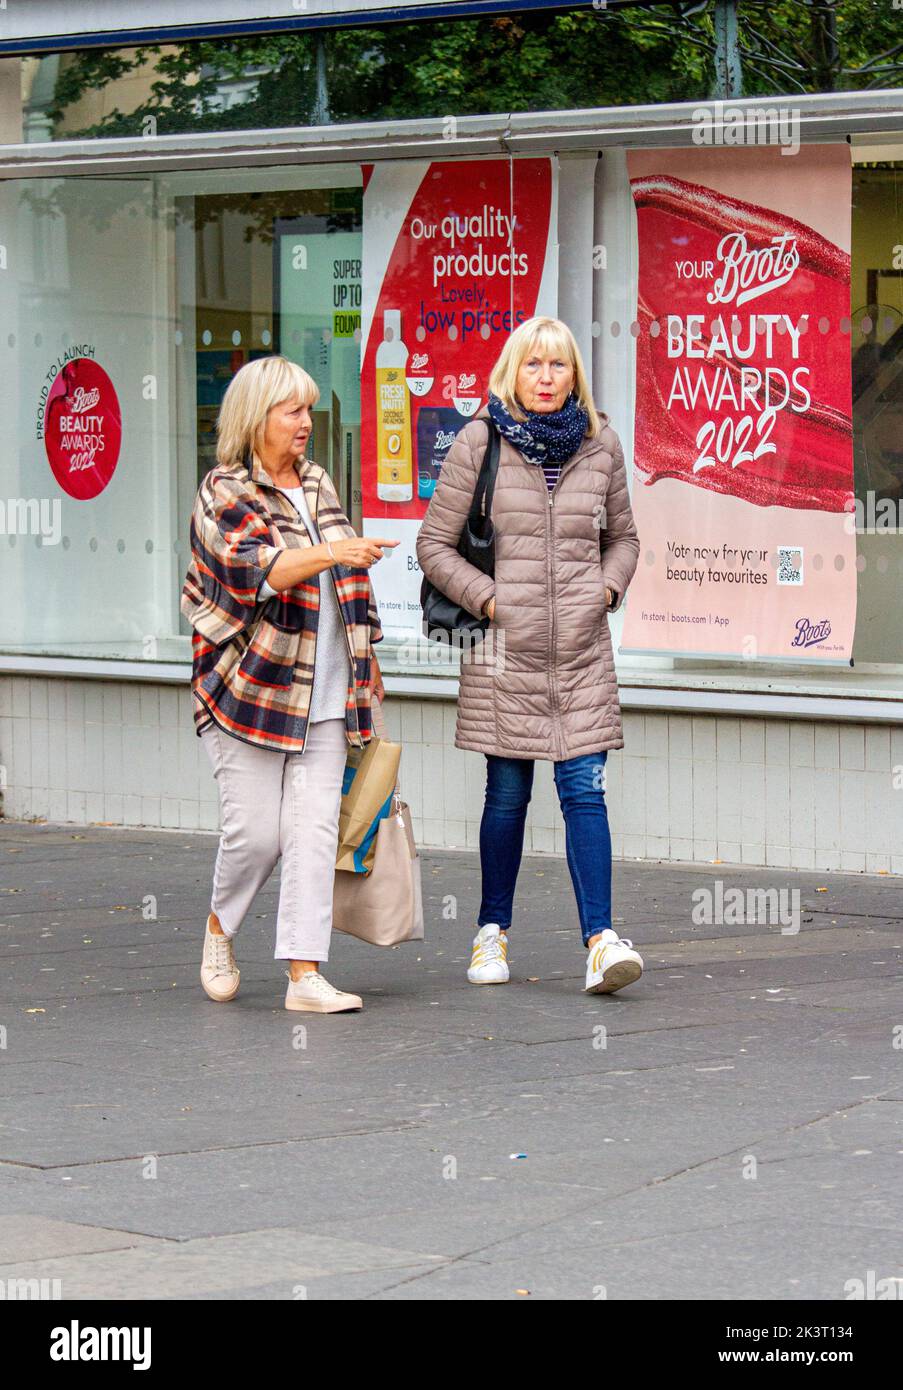 Dundee, Tayside, Scotland, UK. 28th September 2022. UK Weather: On this bright cold Autumn Day, temperatures in some parts of Northeast Scotland reached 14°C. In late September, local trendy women are out and about shopping in Dundee city centre, albeit cautiously due to the high cost of living. Credit: Dundee Photographics/Alamy Live News Stock Photo